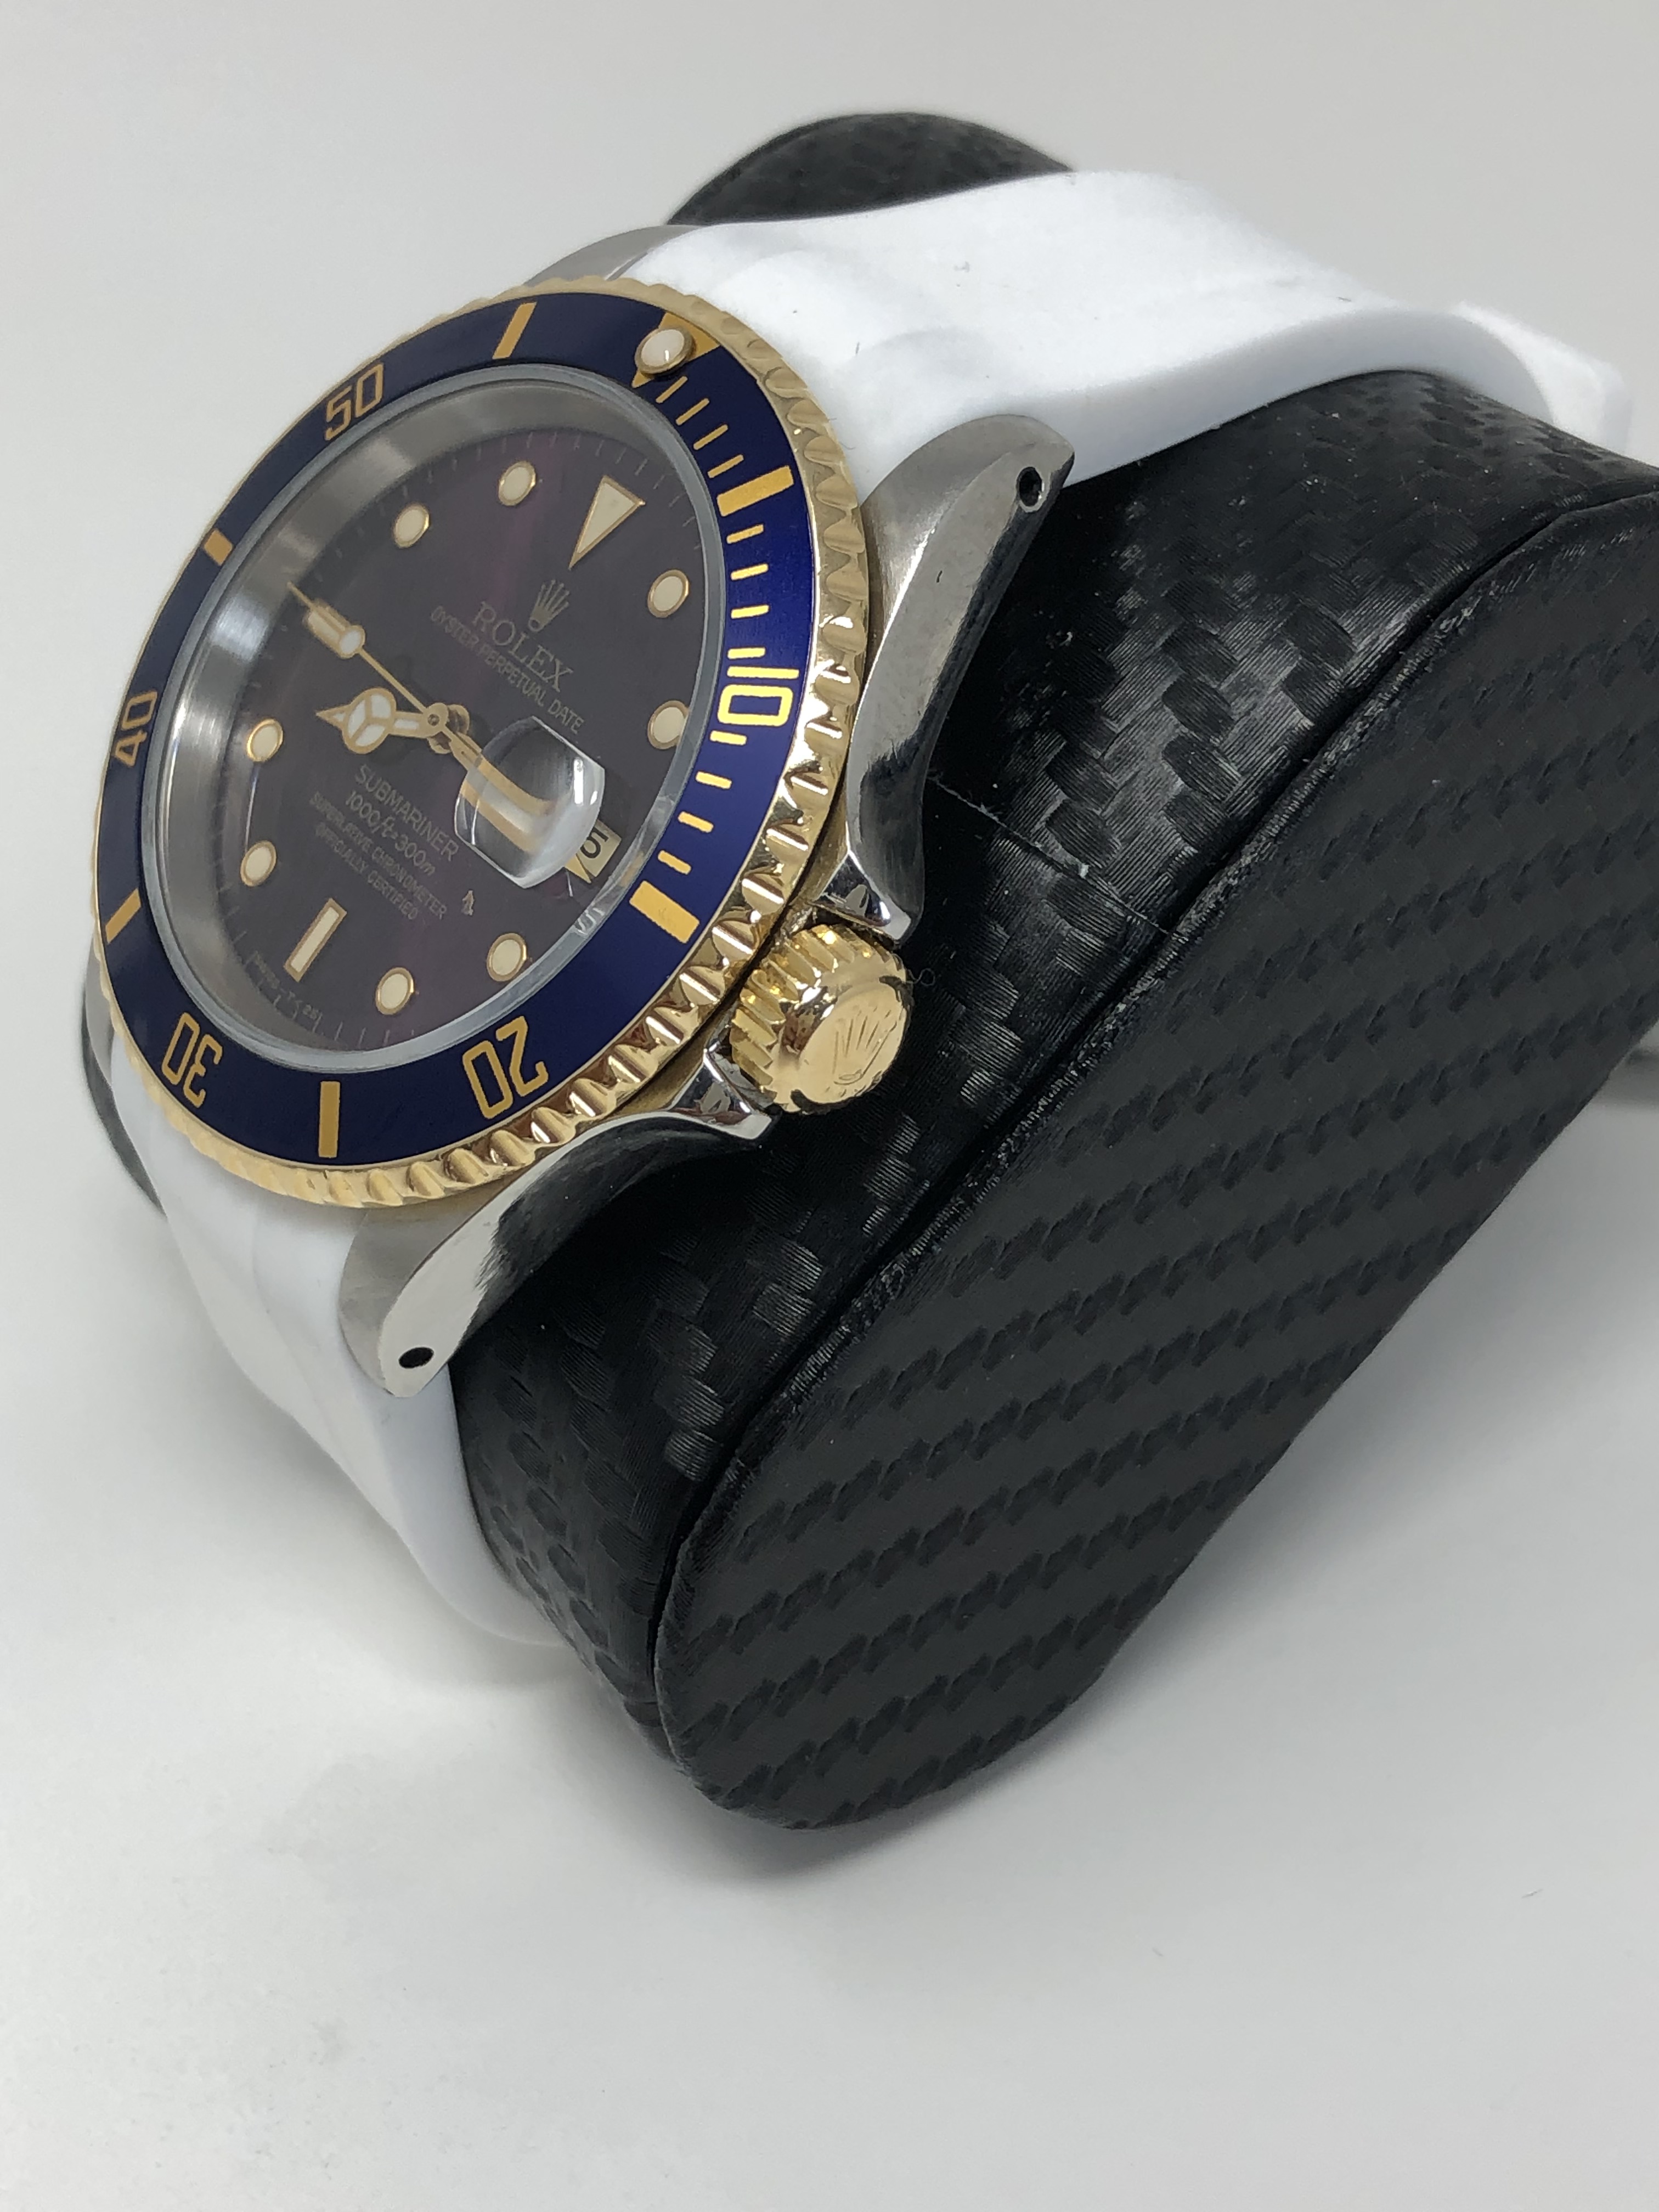 Rolex Submariner 16610 two tone blue dial with white strap